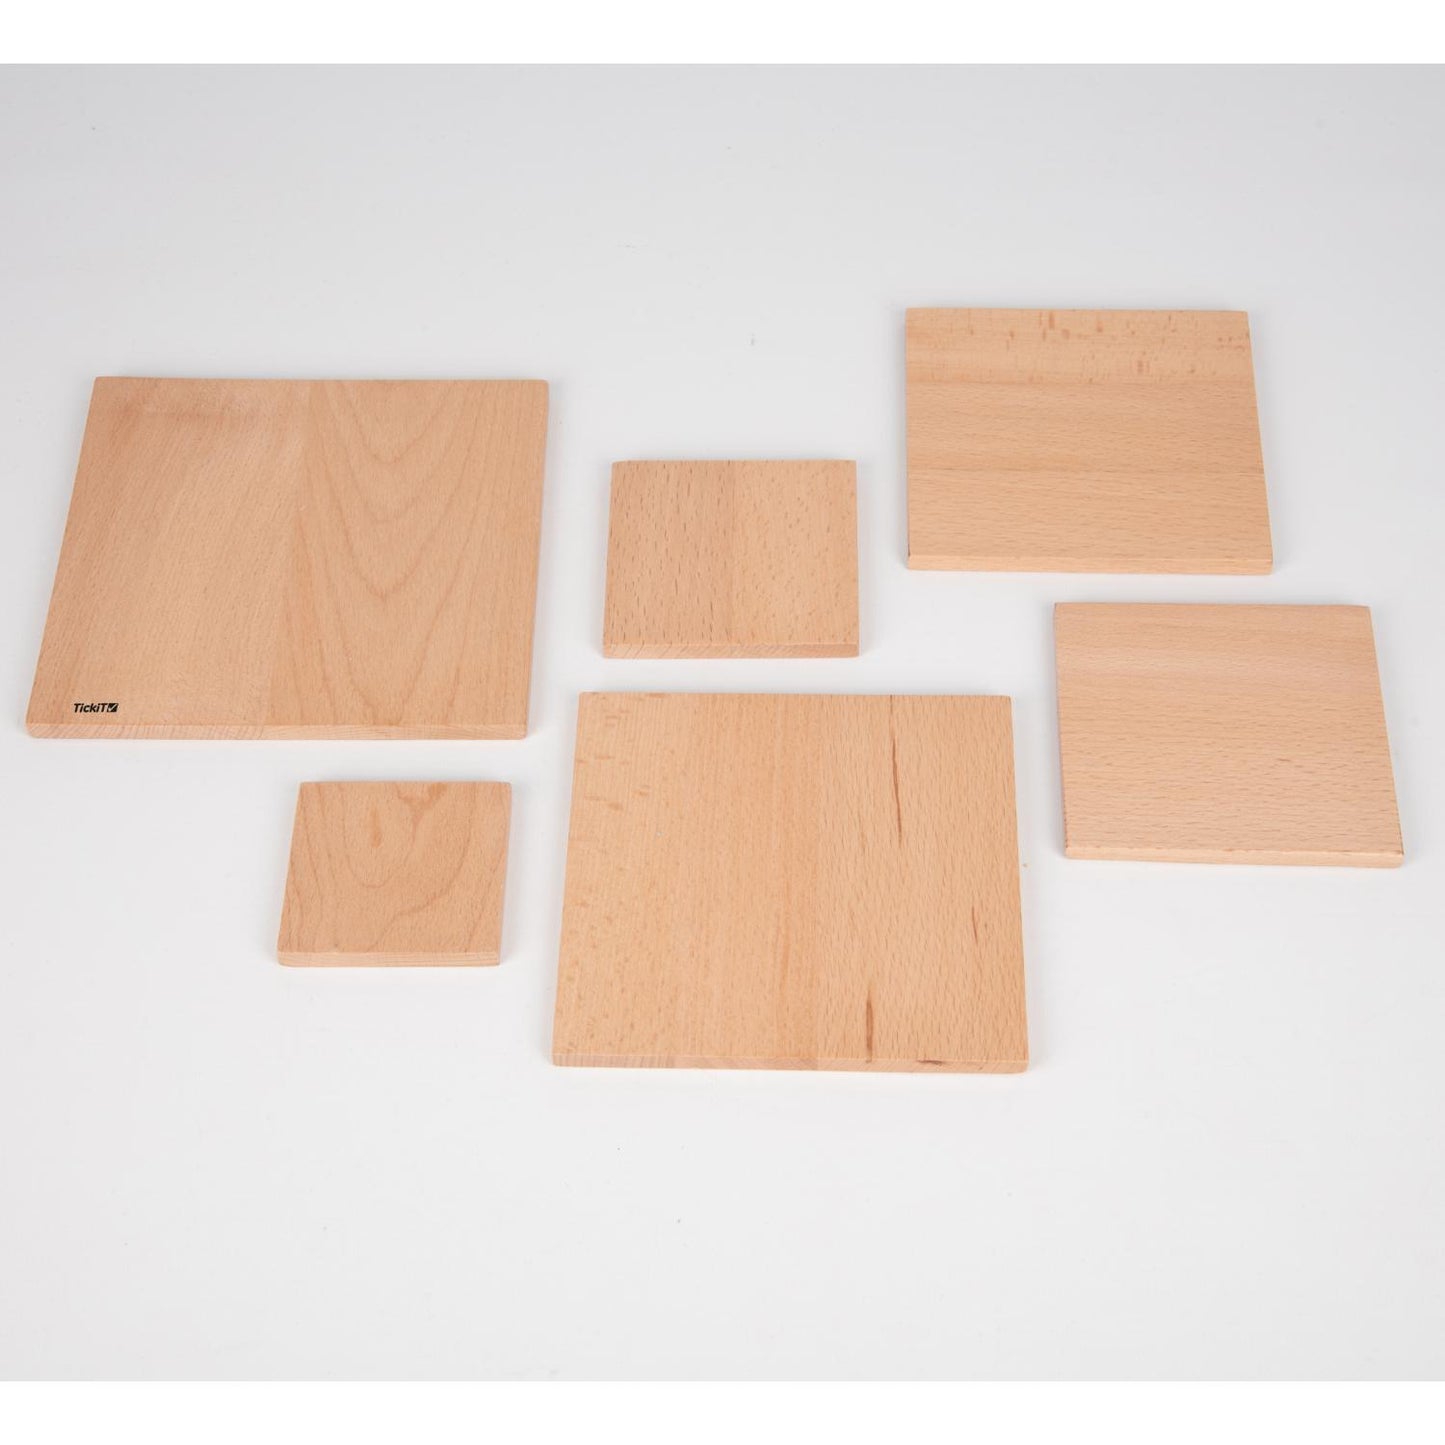 Natural Wooden Square Panels | 6 Pieces | Wooden Activity Toy